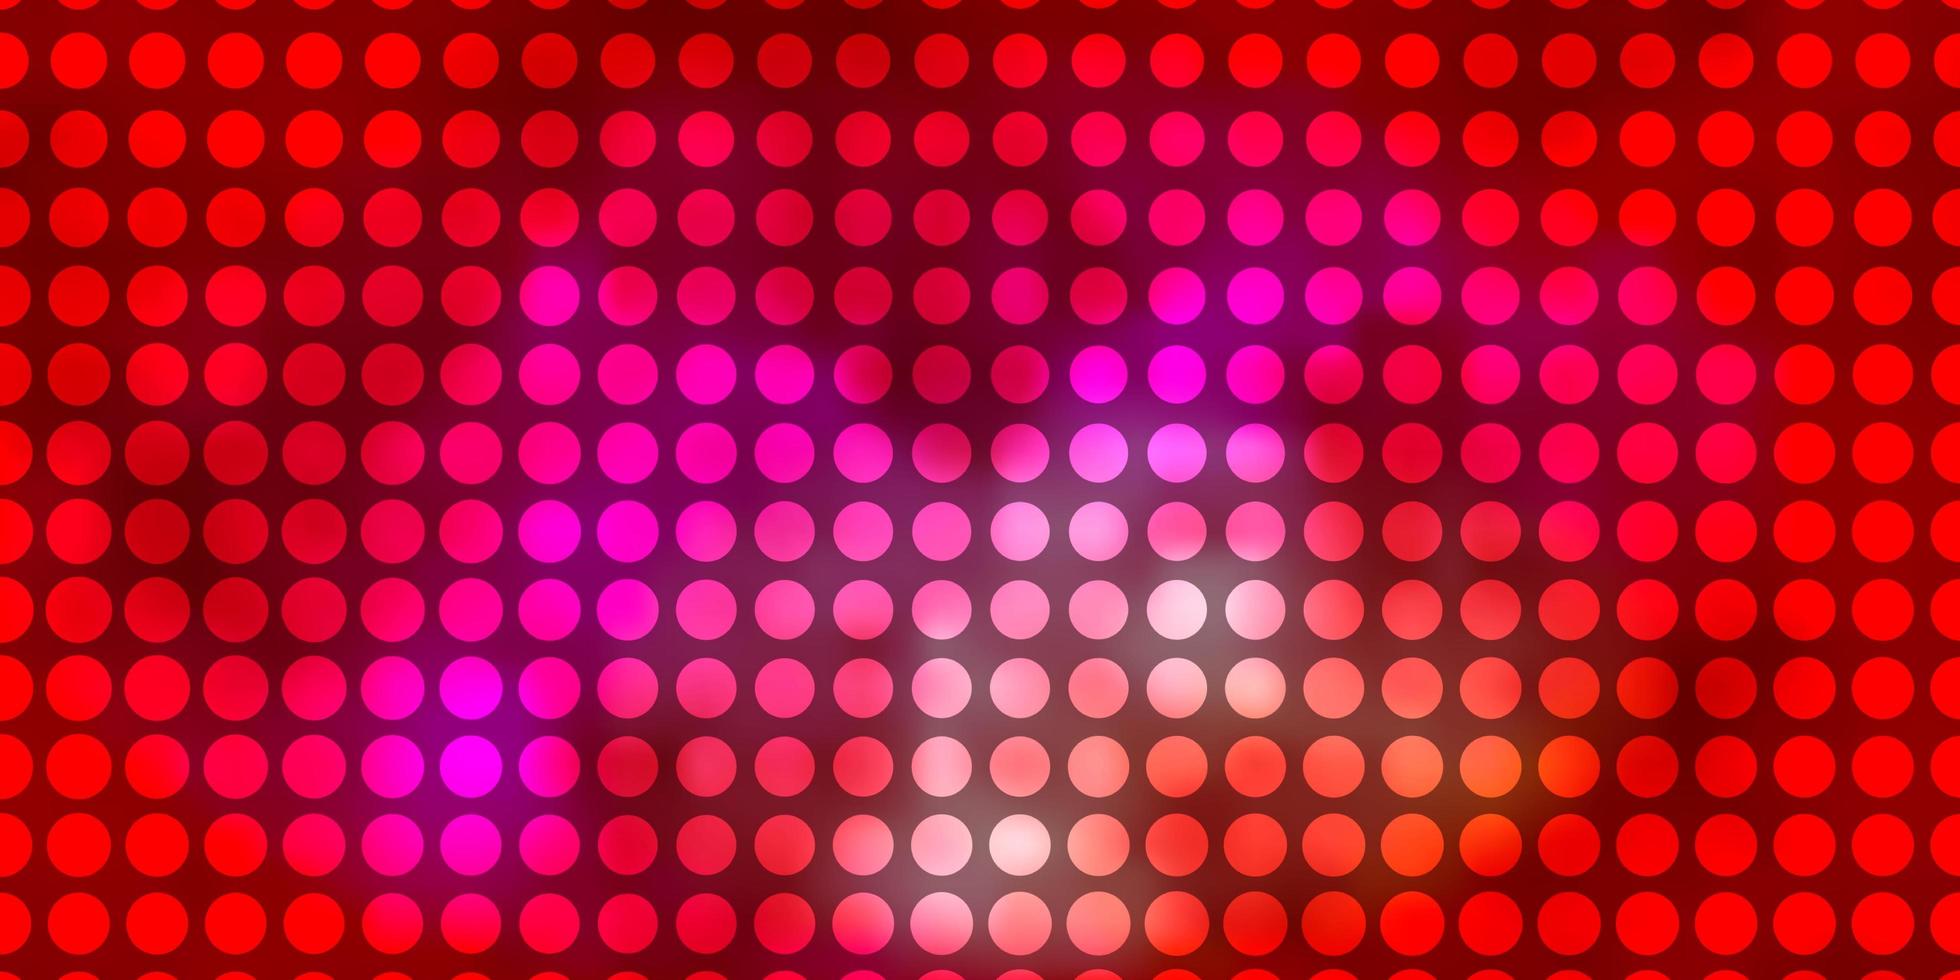 Light Red vector template with circles. Abstract decorative design in gradient style with bubbles. Pattern for websites, landing pages.